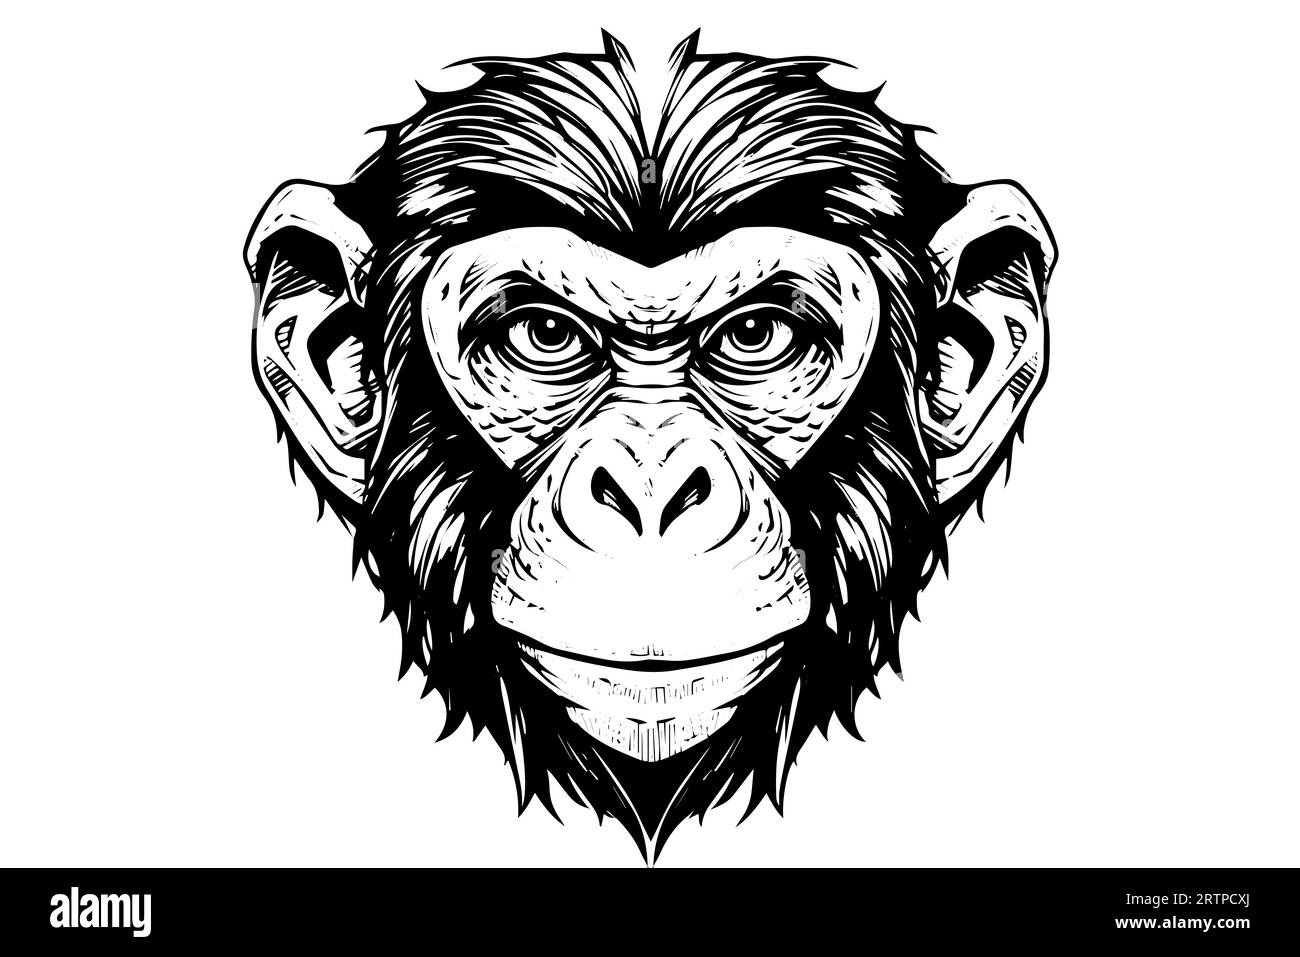 Monkey head or face hand drawn vector illustration in engraving style ink sketch. Stock Vector